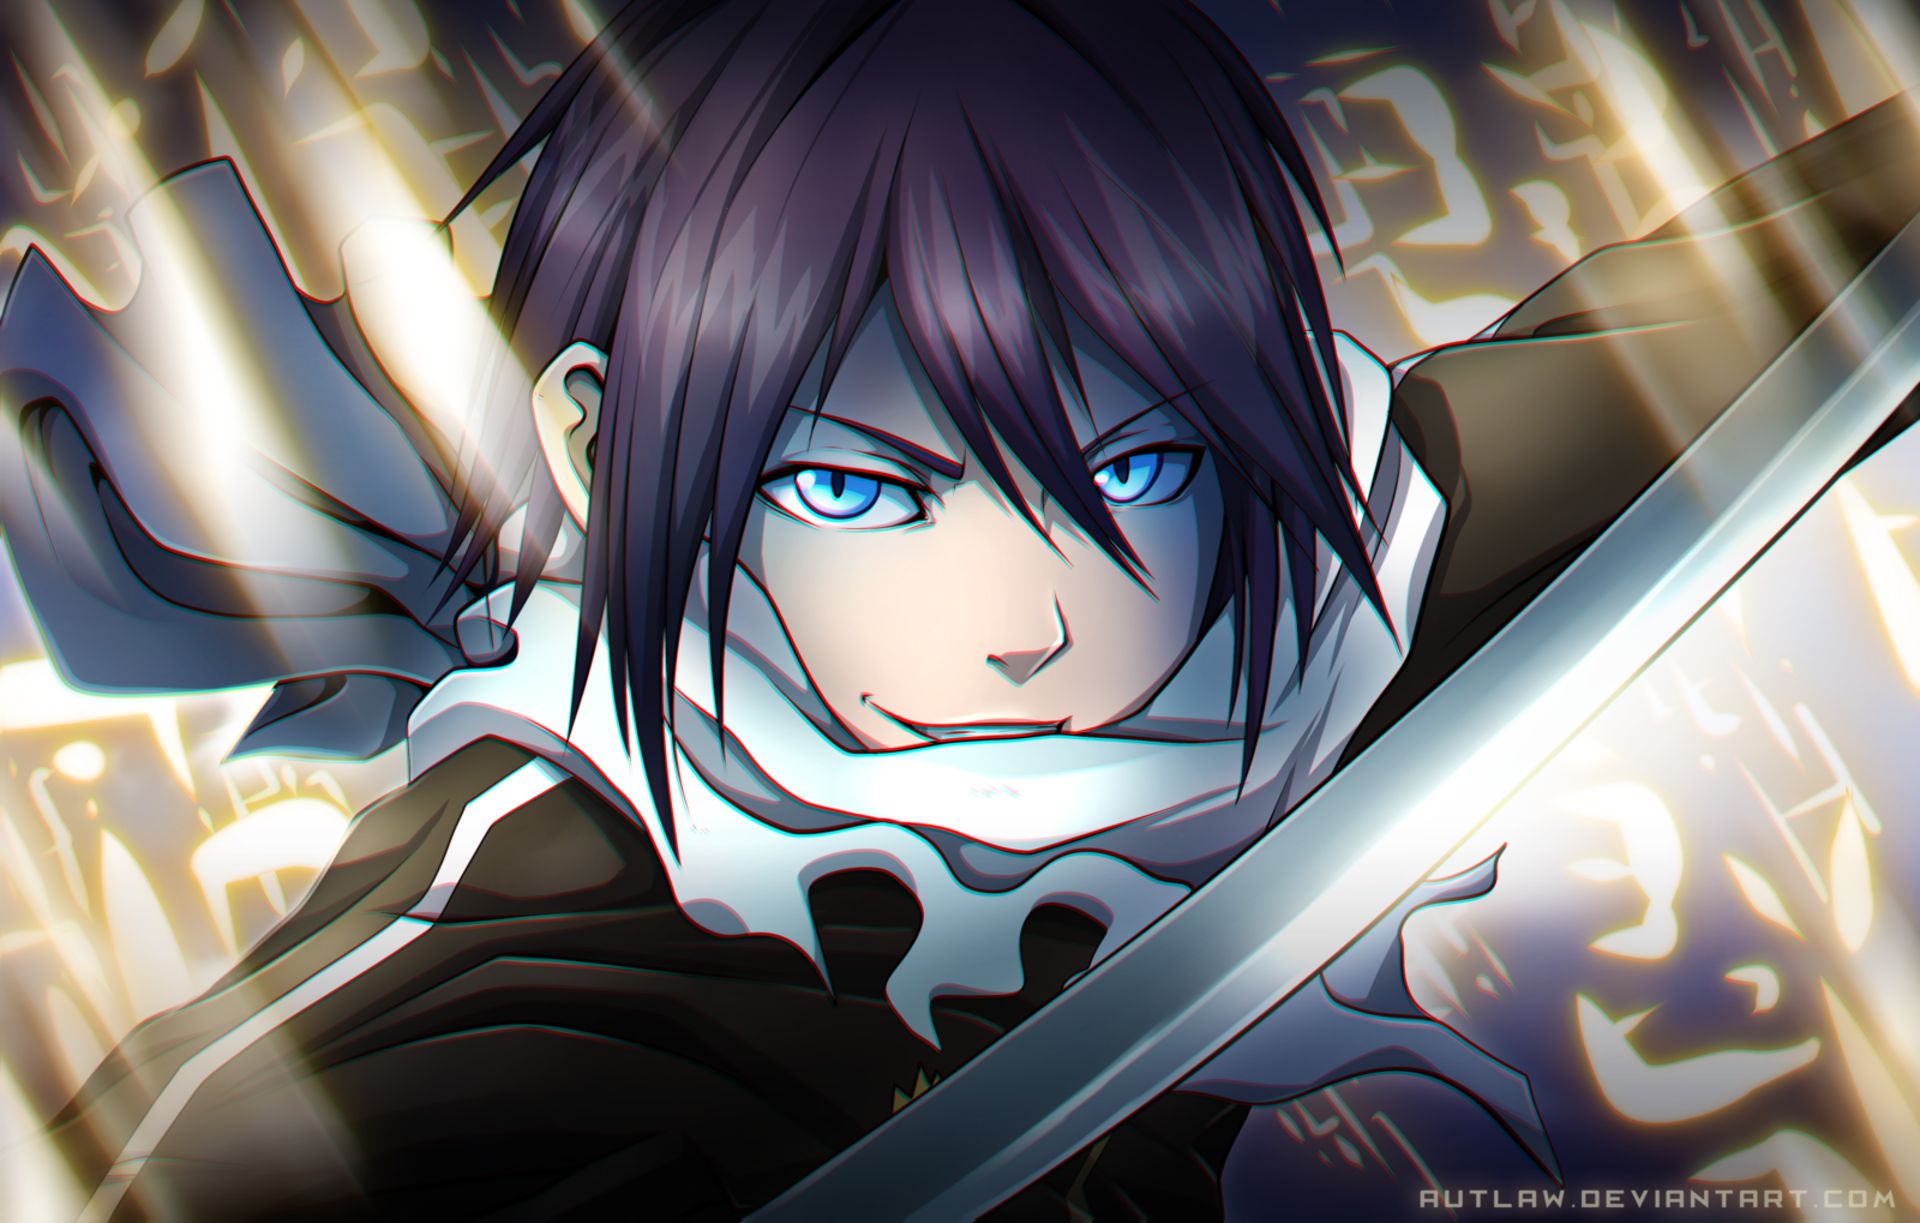 Will there be a season 3 of Noragami? - Quora